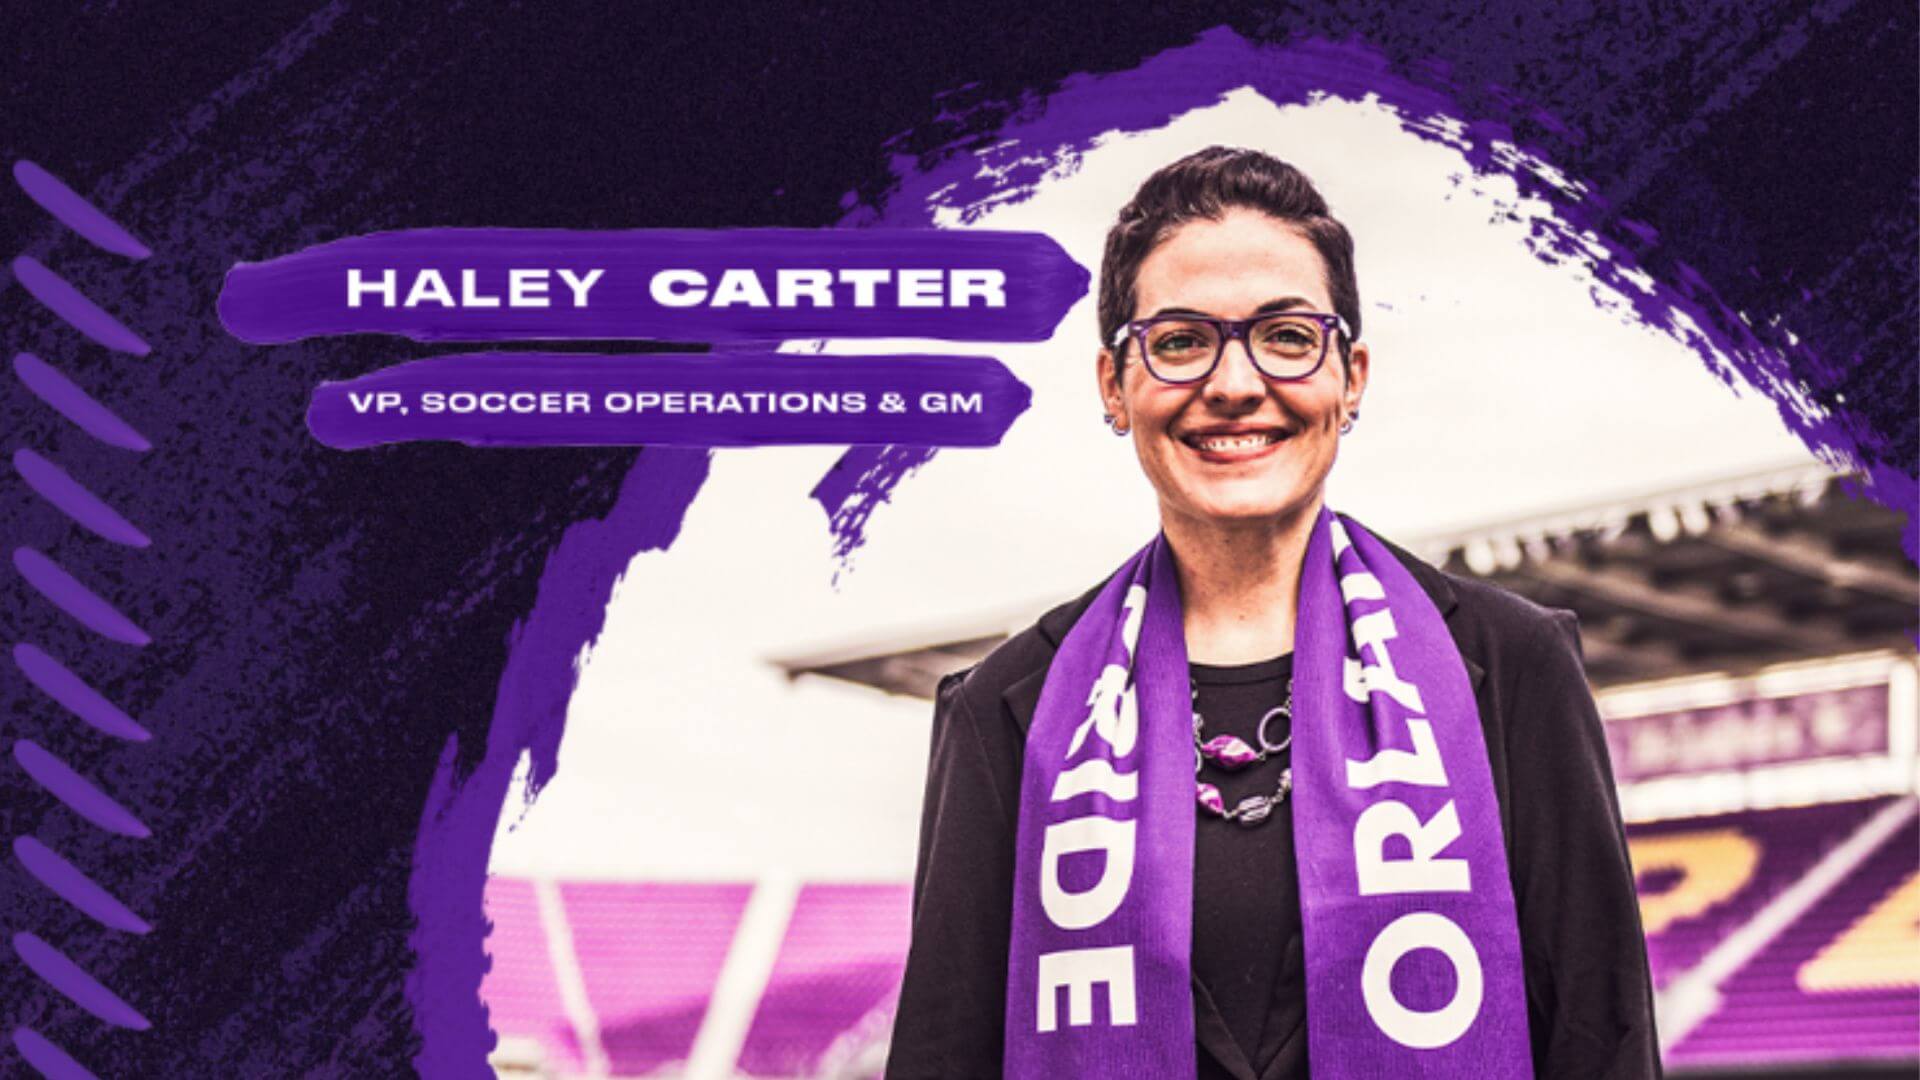 Haley Carter, the new VP and GM at the Orlando Pride.